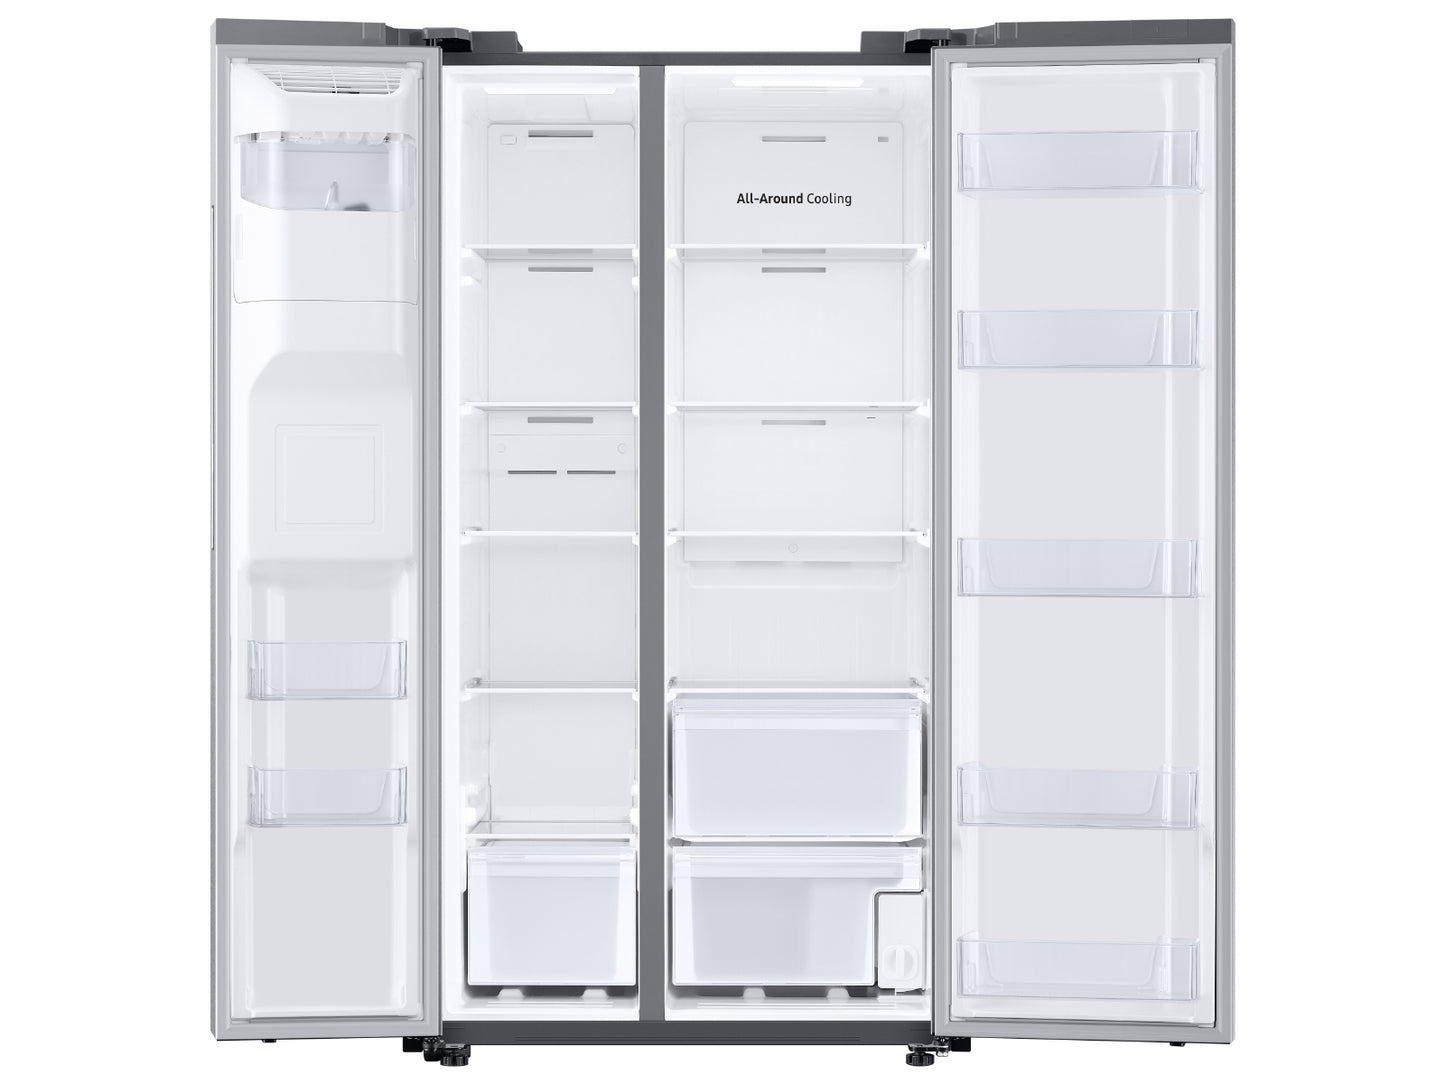 Samsung 27.4 cu. ft. Large Capacity Side-by-Side Refrigerator in Stainless Steel